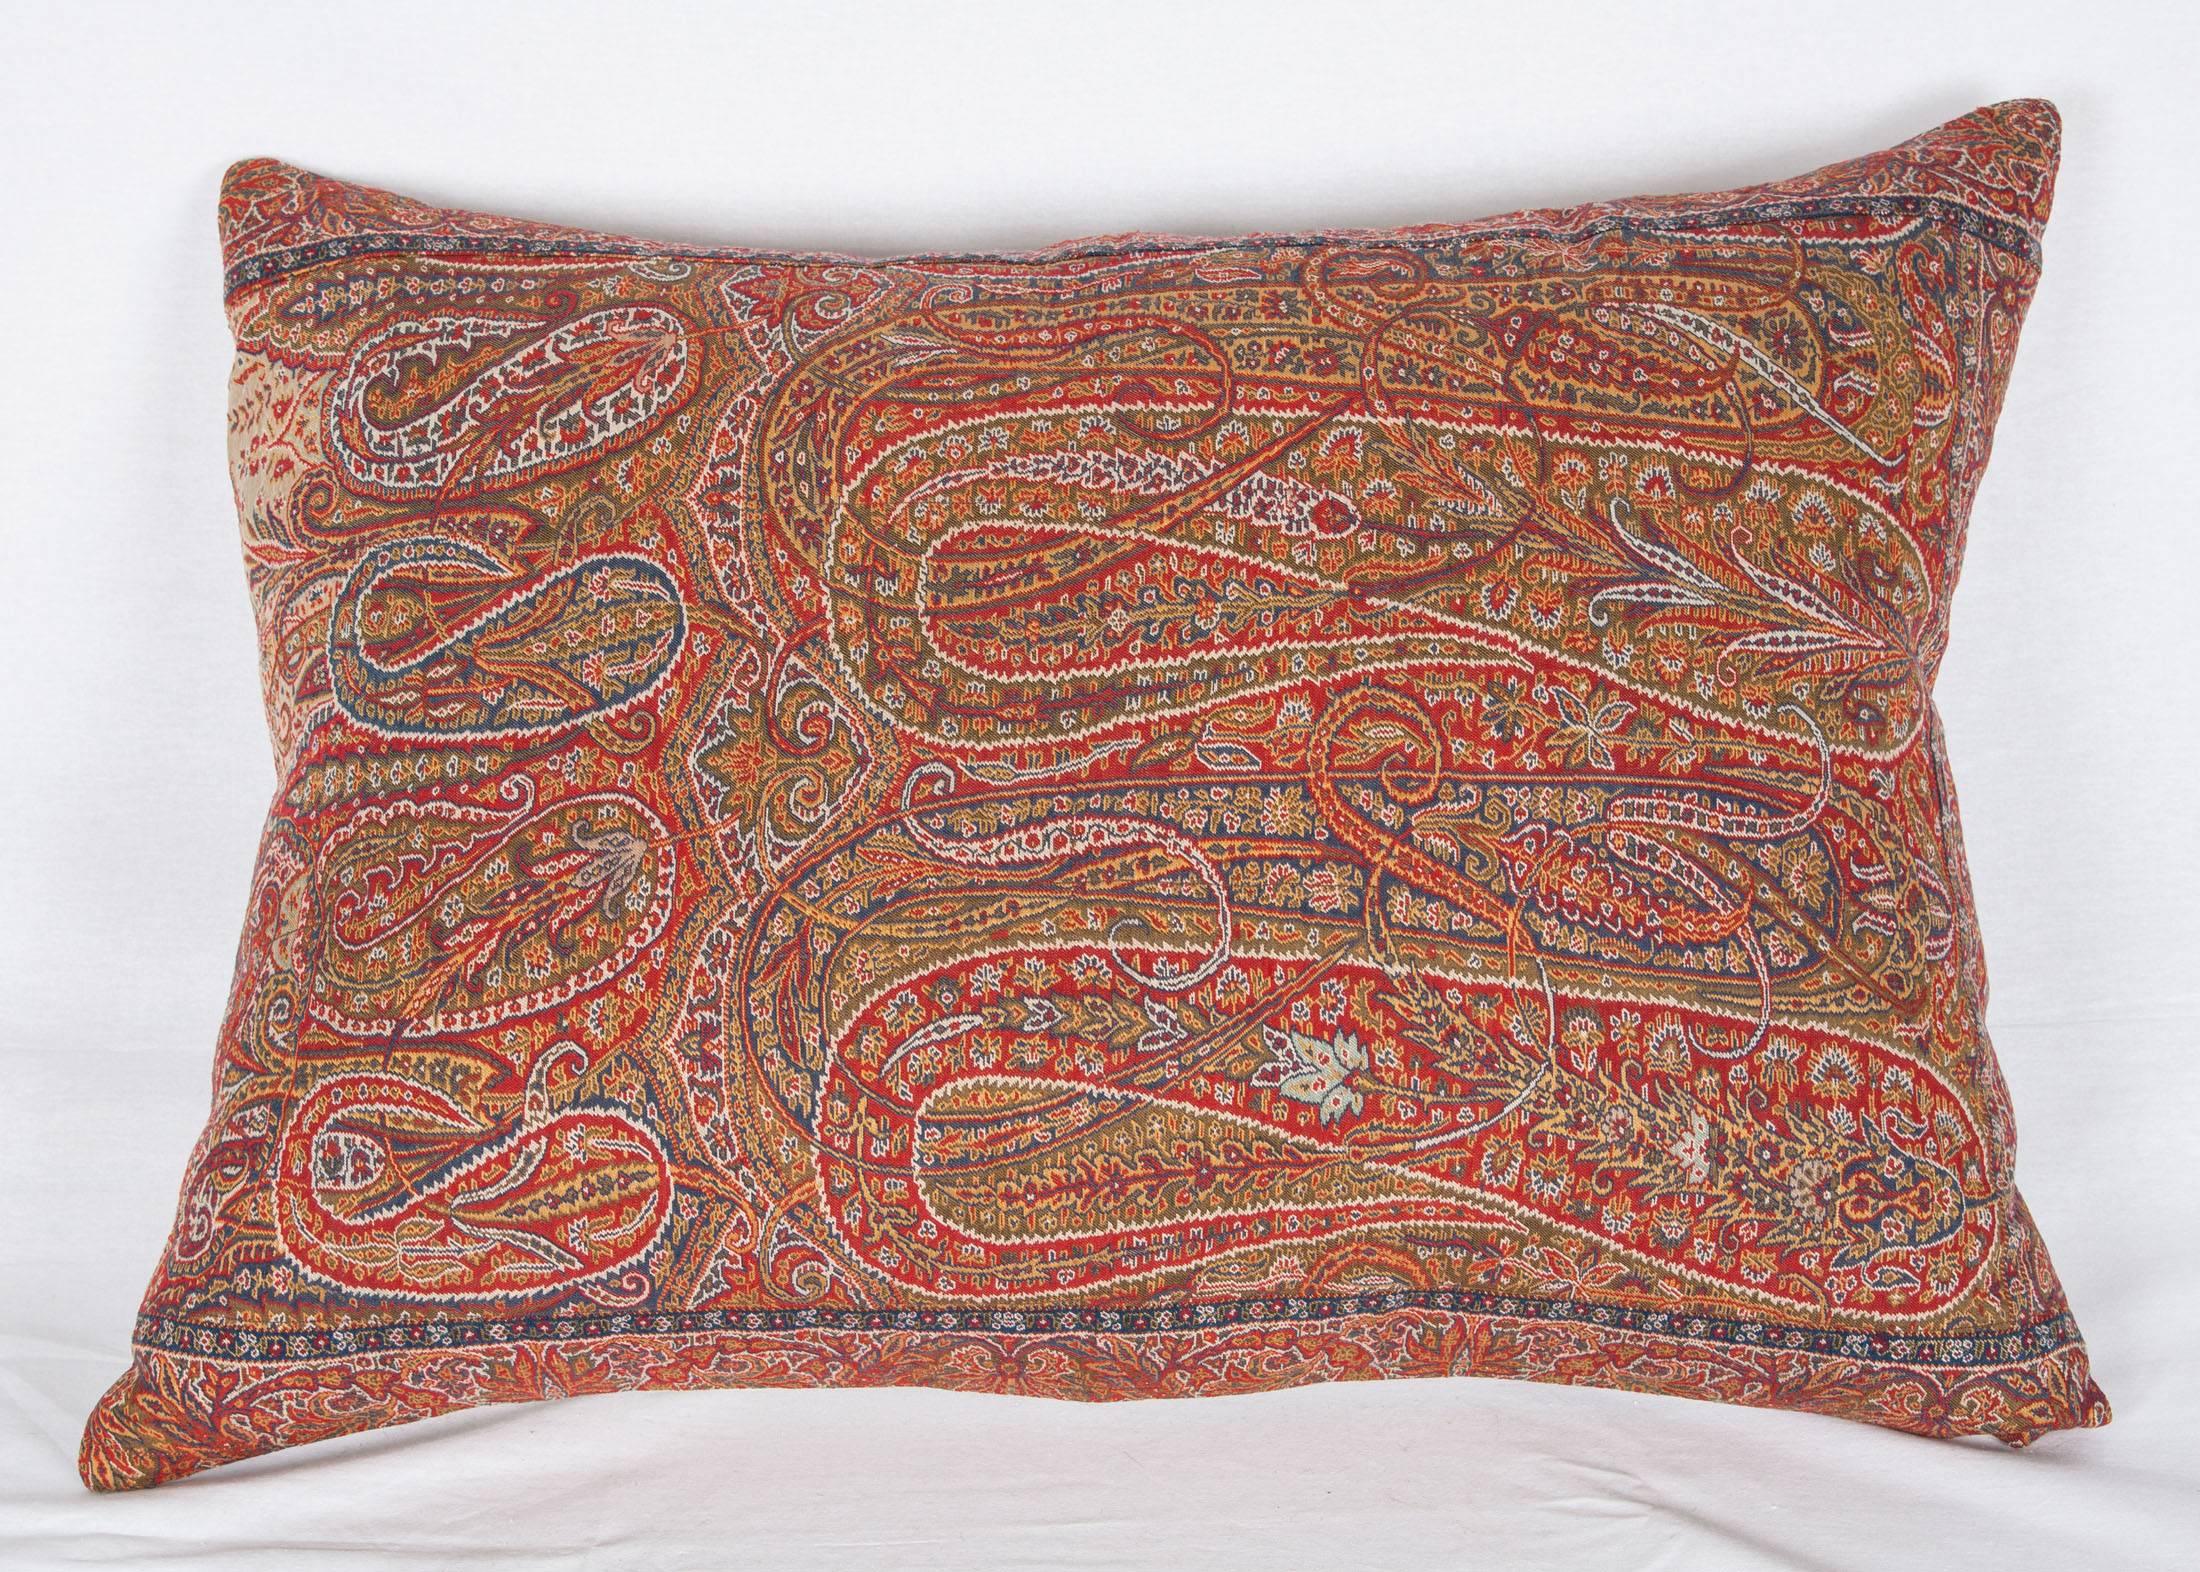 The pillow is made out of a early 19th century paisley shawl.
It does not come with an insert but it comes with a bag made to the size and out of cotton to accommodate the filling.
The backing is made of linen.

Please Note: Filling is not